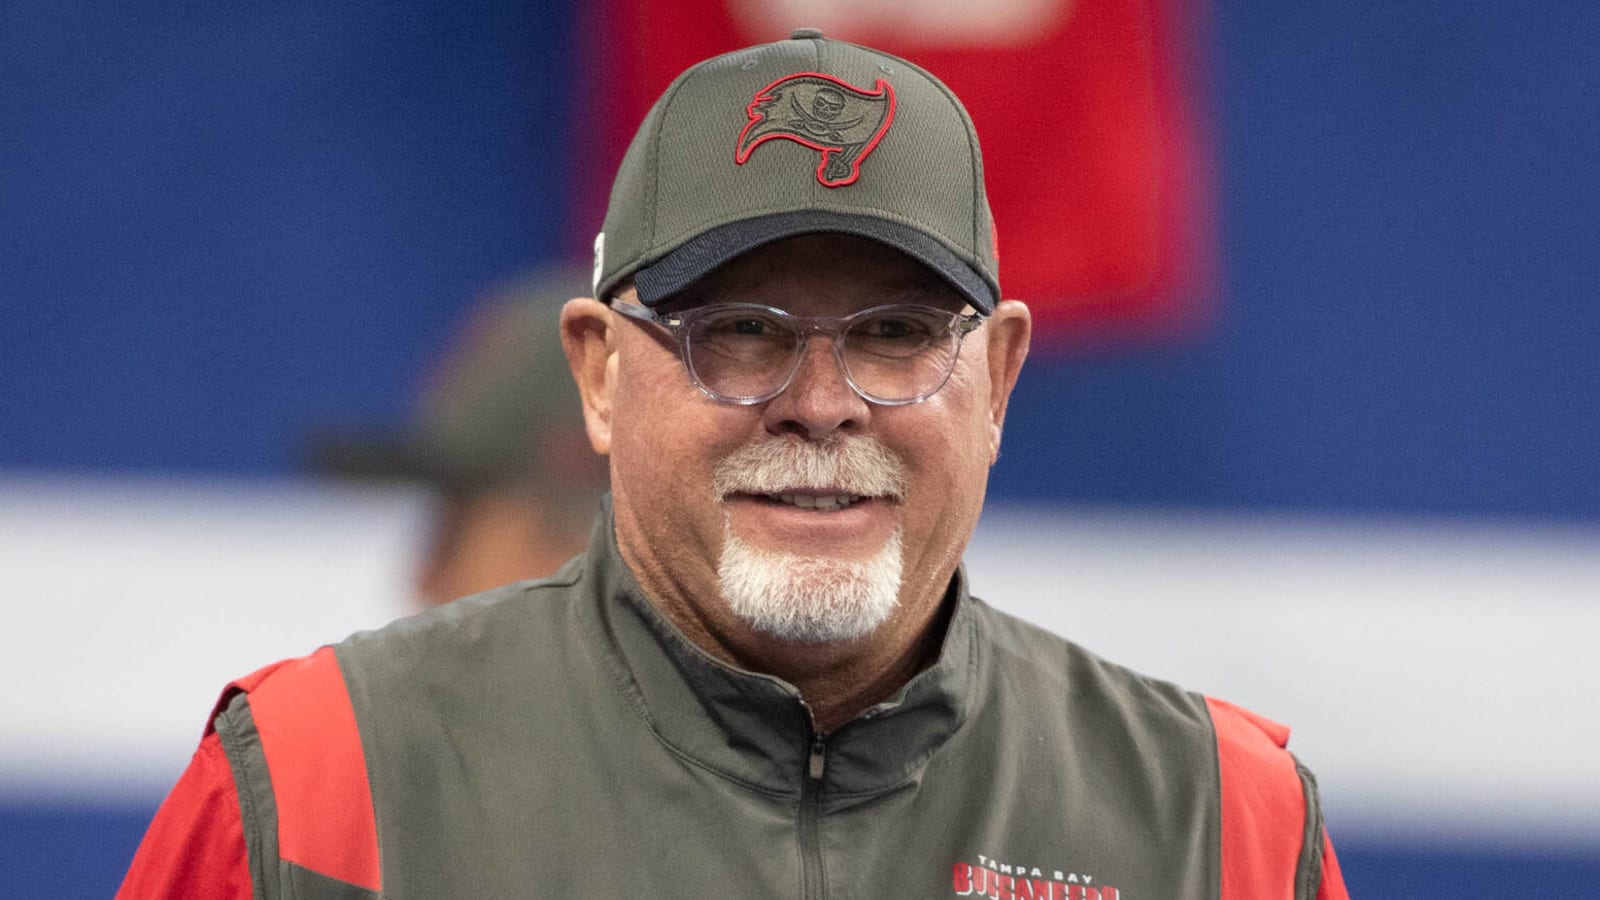 Bruce Arians retires from coaching, Todd Bowles to take over Bucs' HC job